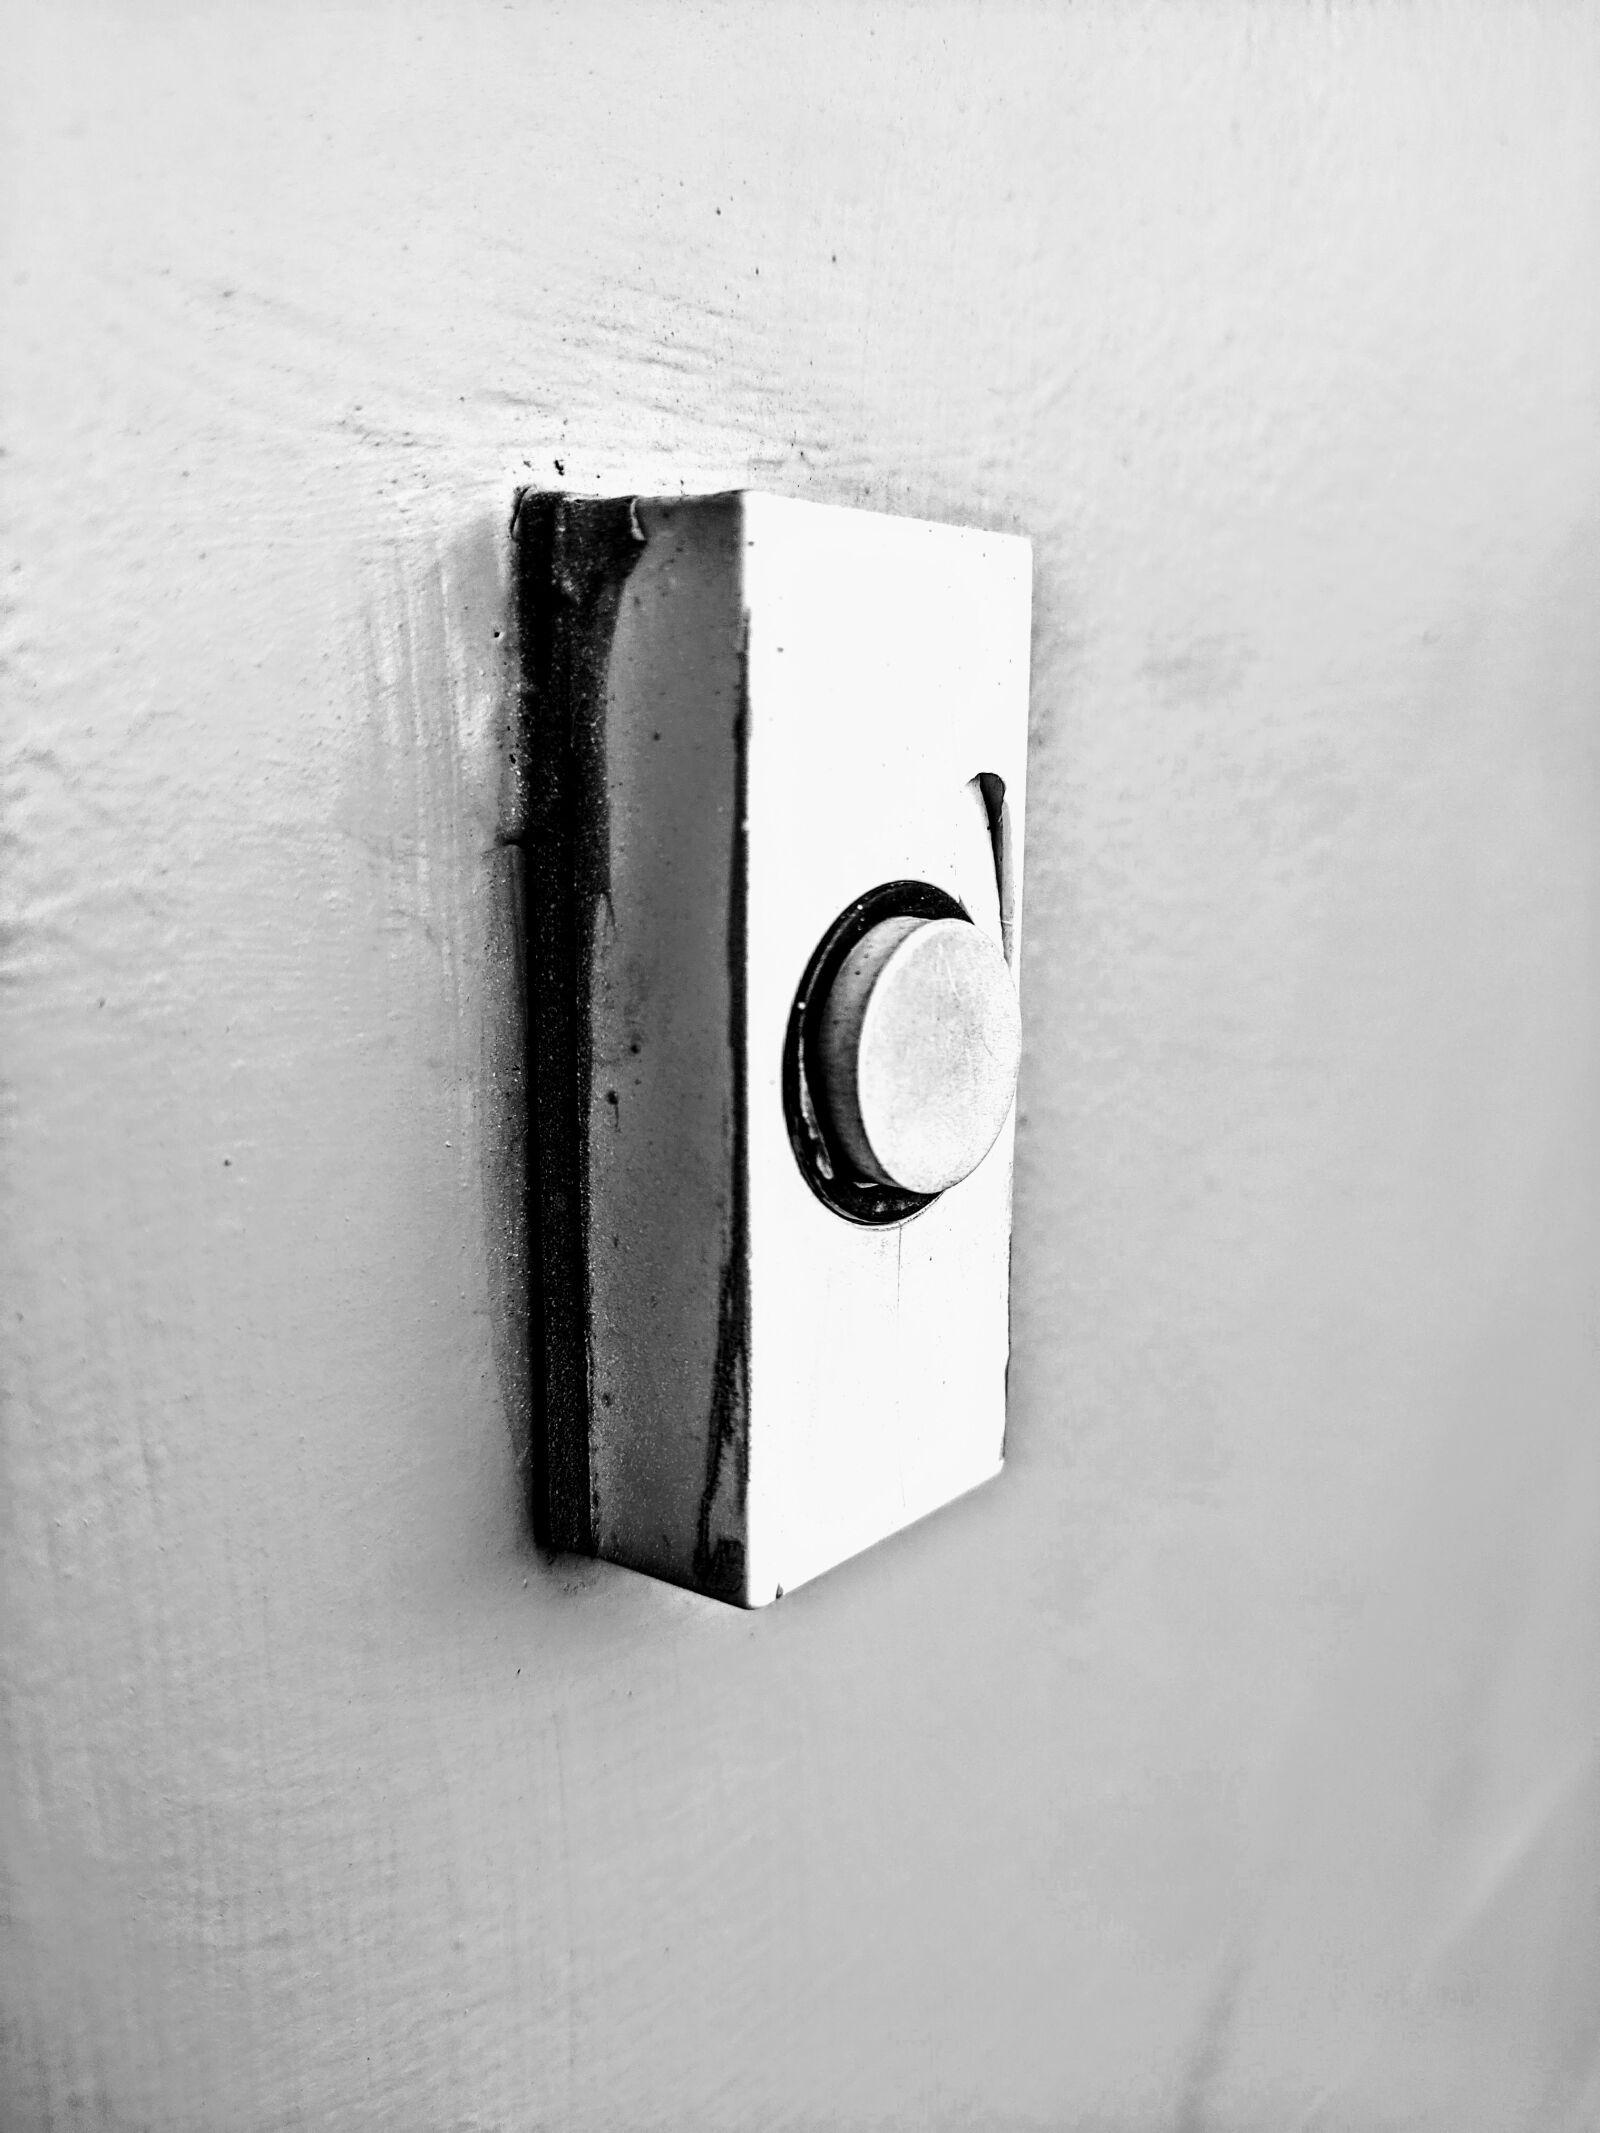 Google Pixel sample photo. Doorbell, black and white photography